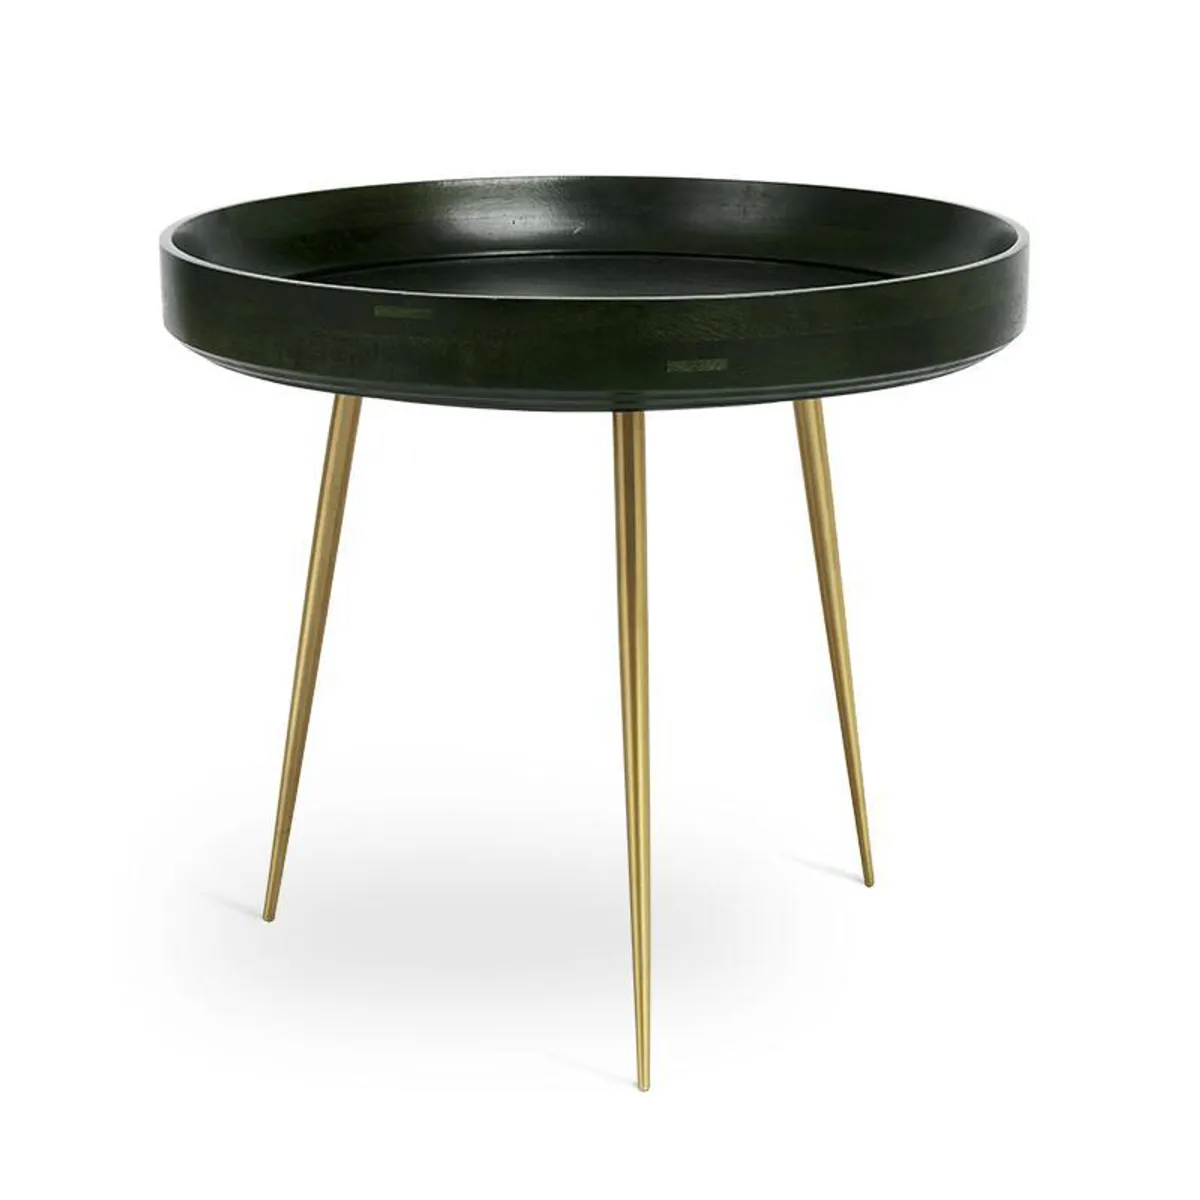 Bowl Table Brass And Green Contract Suitable Table For Cafe Hotel And Healthcare By Inside Out Contracts